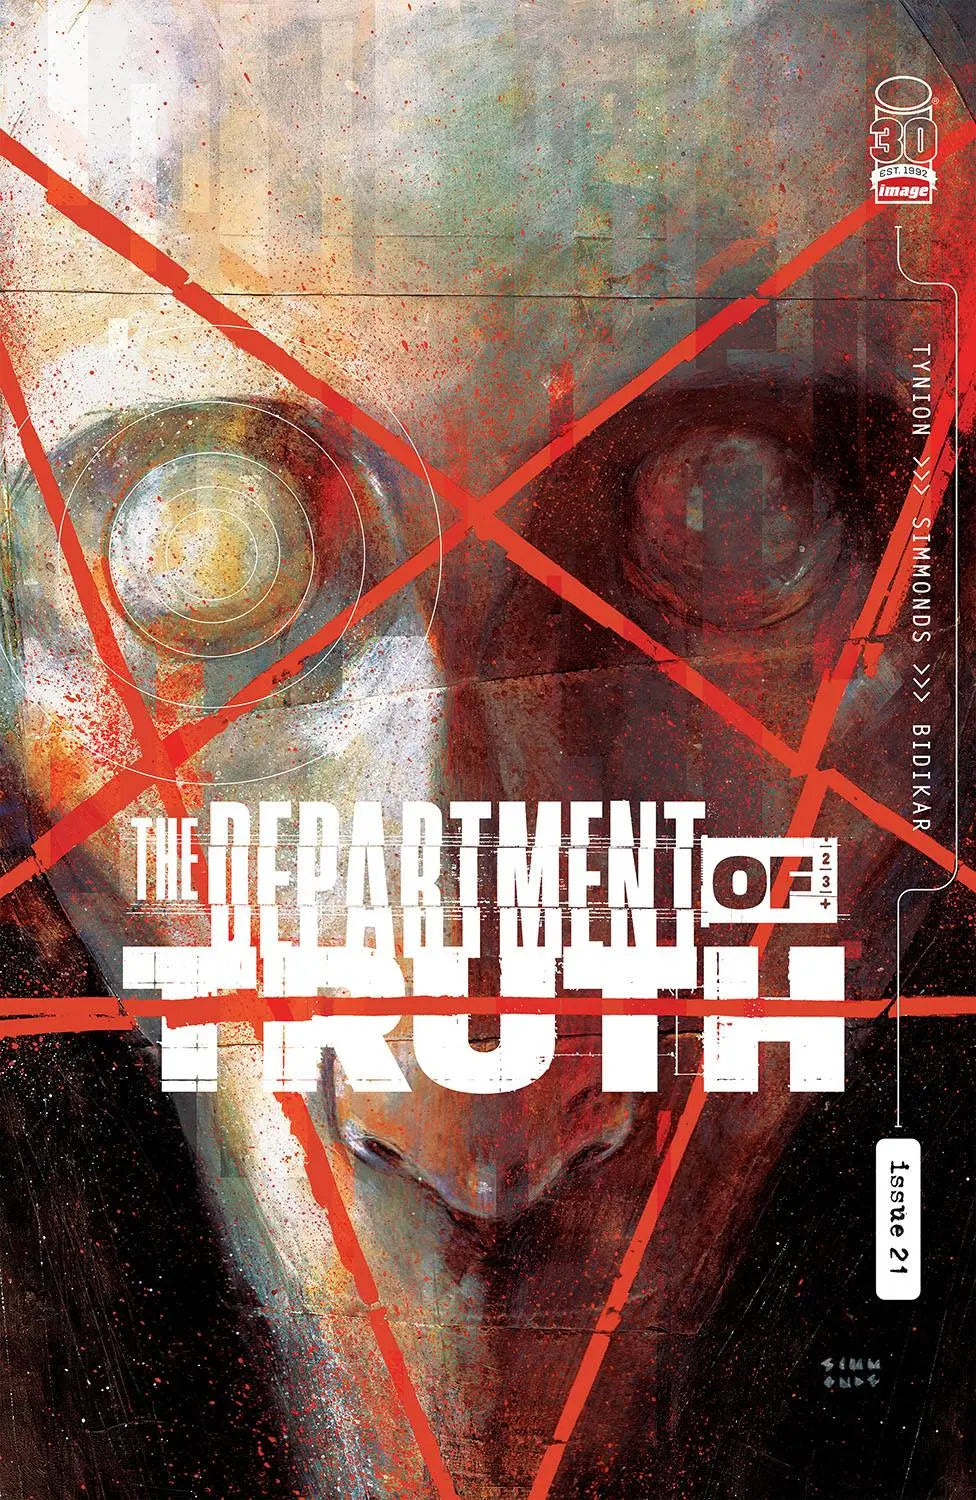 The Department of Truth #21 - Cover A